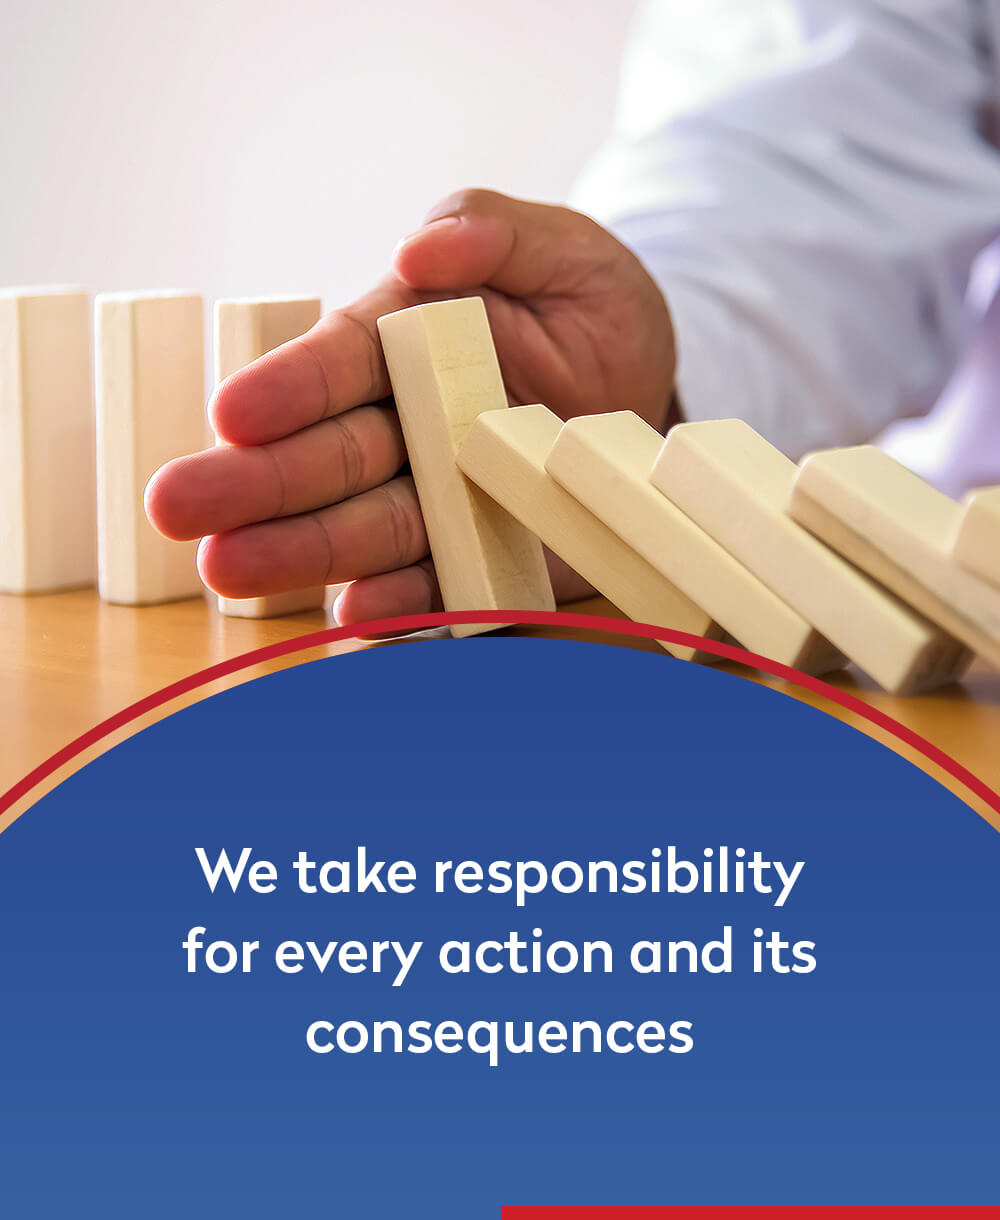 We take responsibility for every action and its consequences